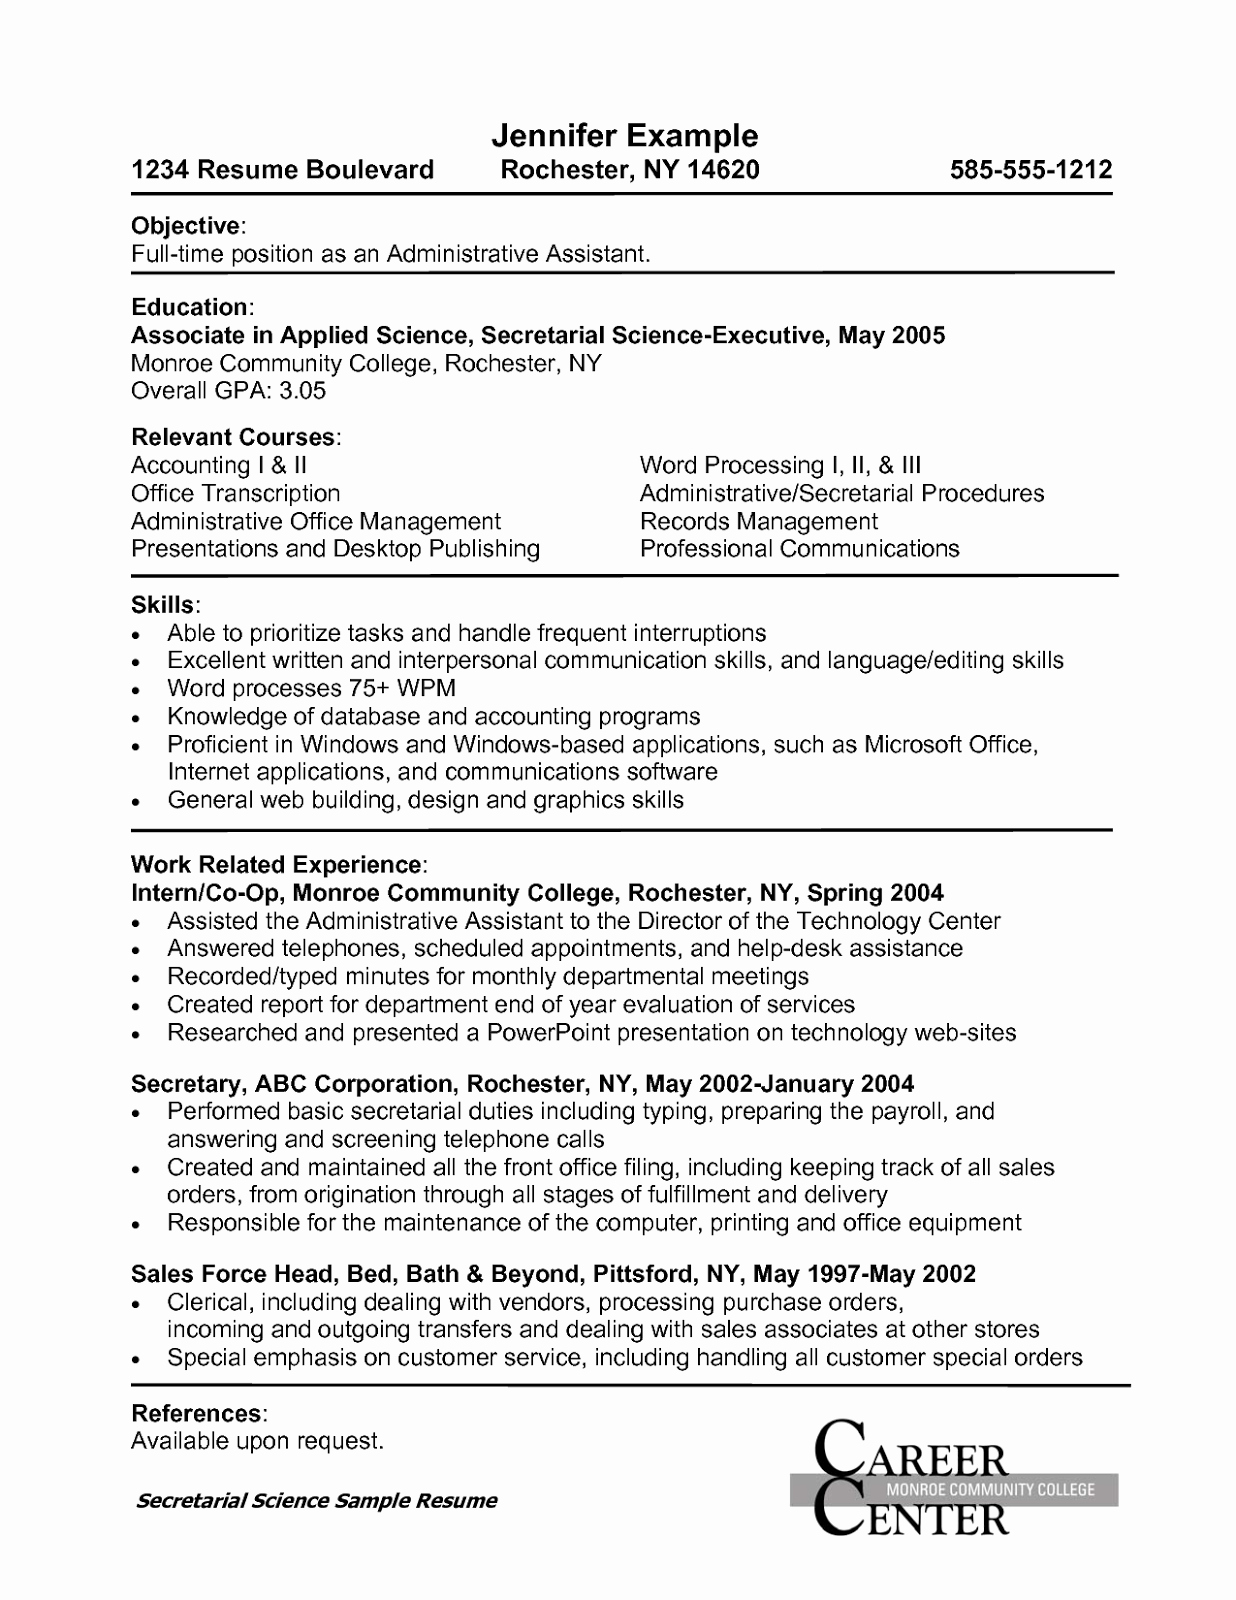 Resume Objectives Administrative assistant Entry Level